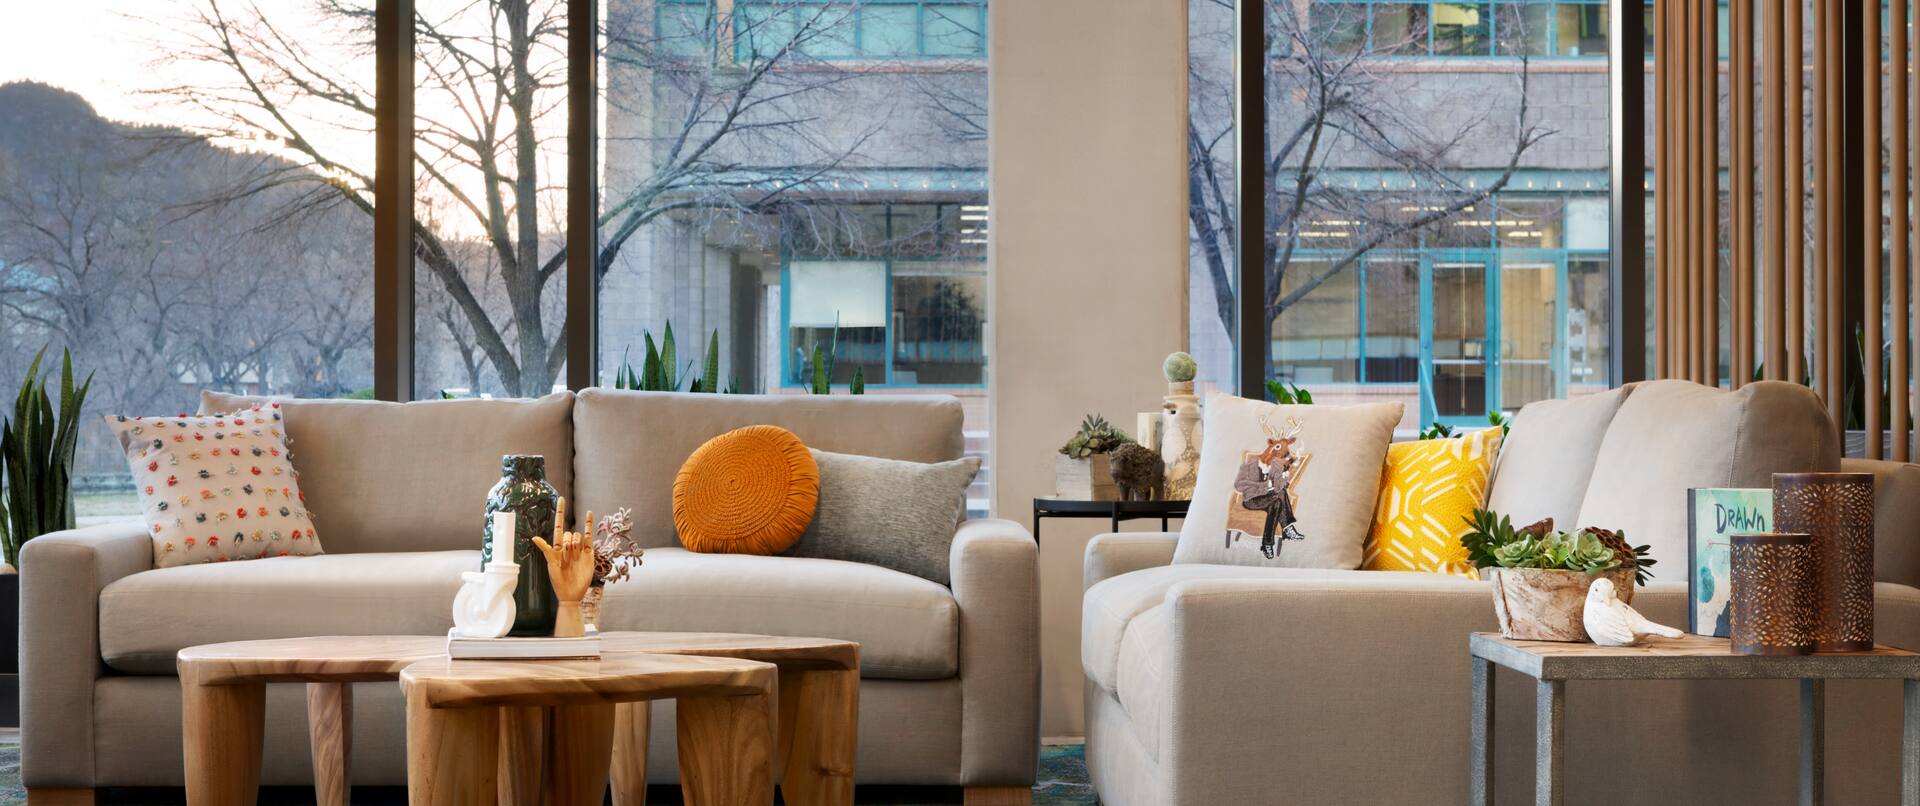 Sofa Couches, Wooden Coffee Tables and Mountain Views in our Atrium Lobby